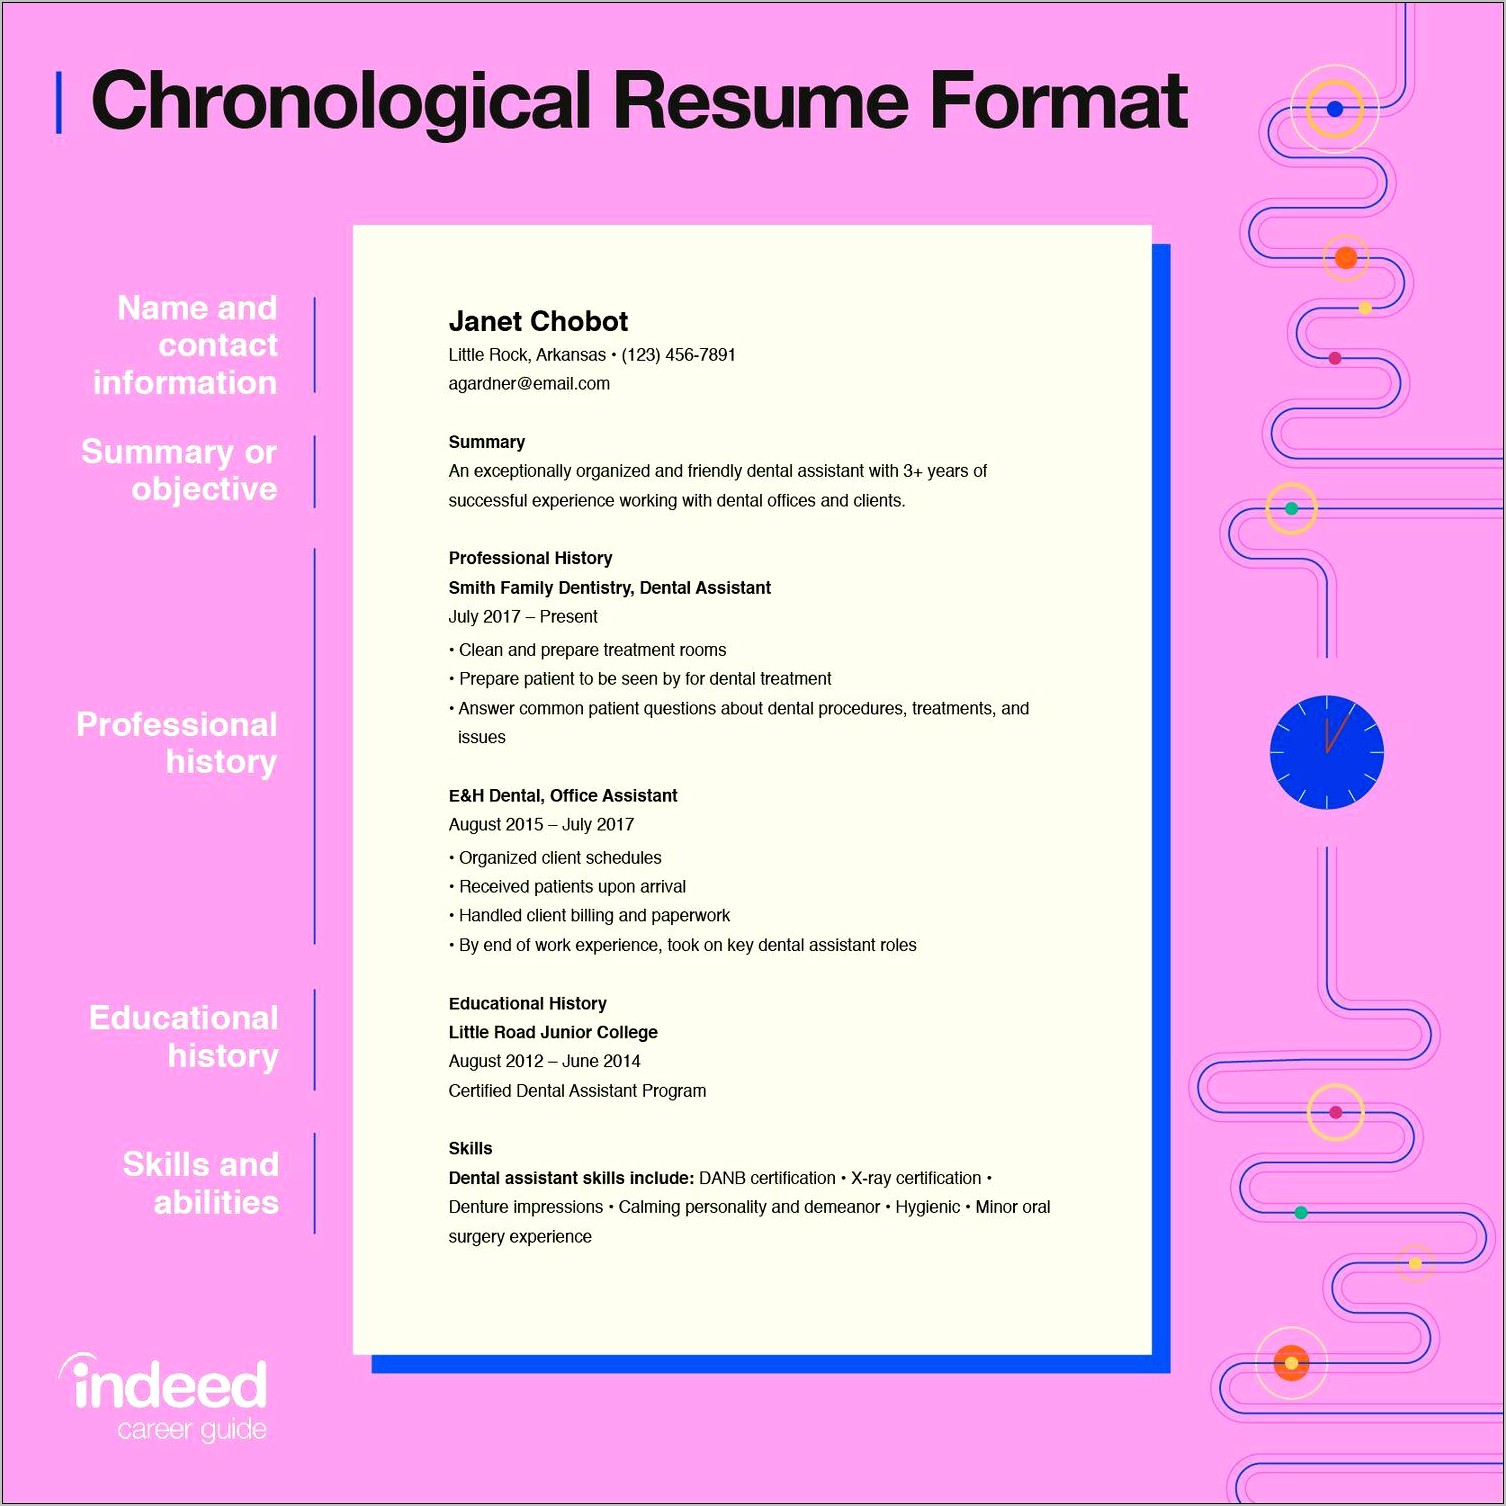 Do You Talk About Resume In Chronological Experience